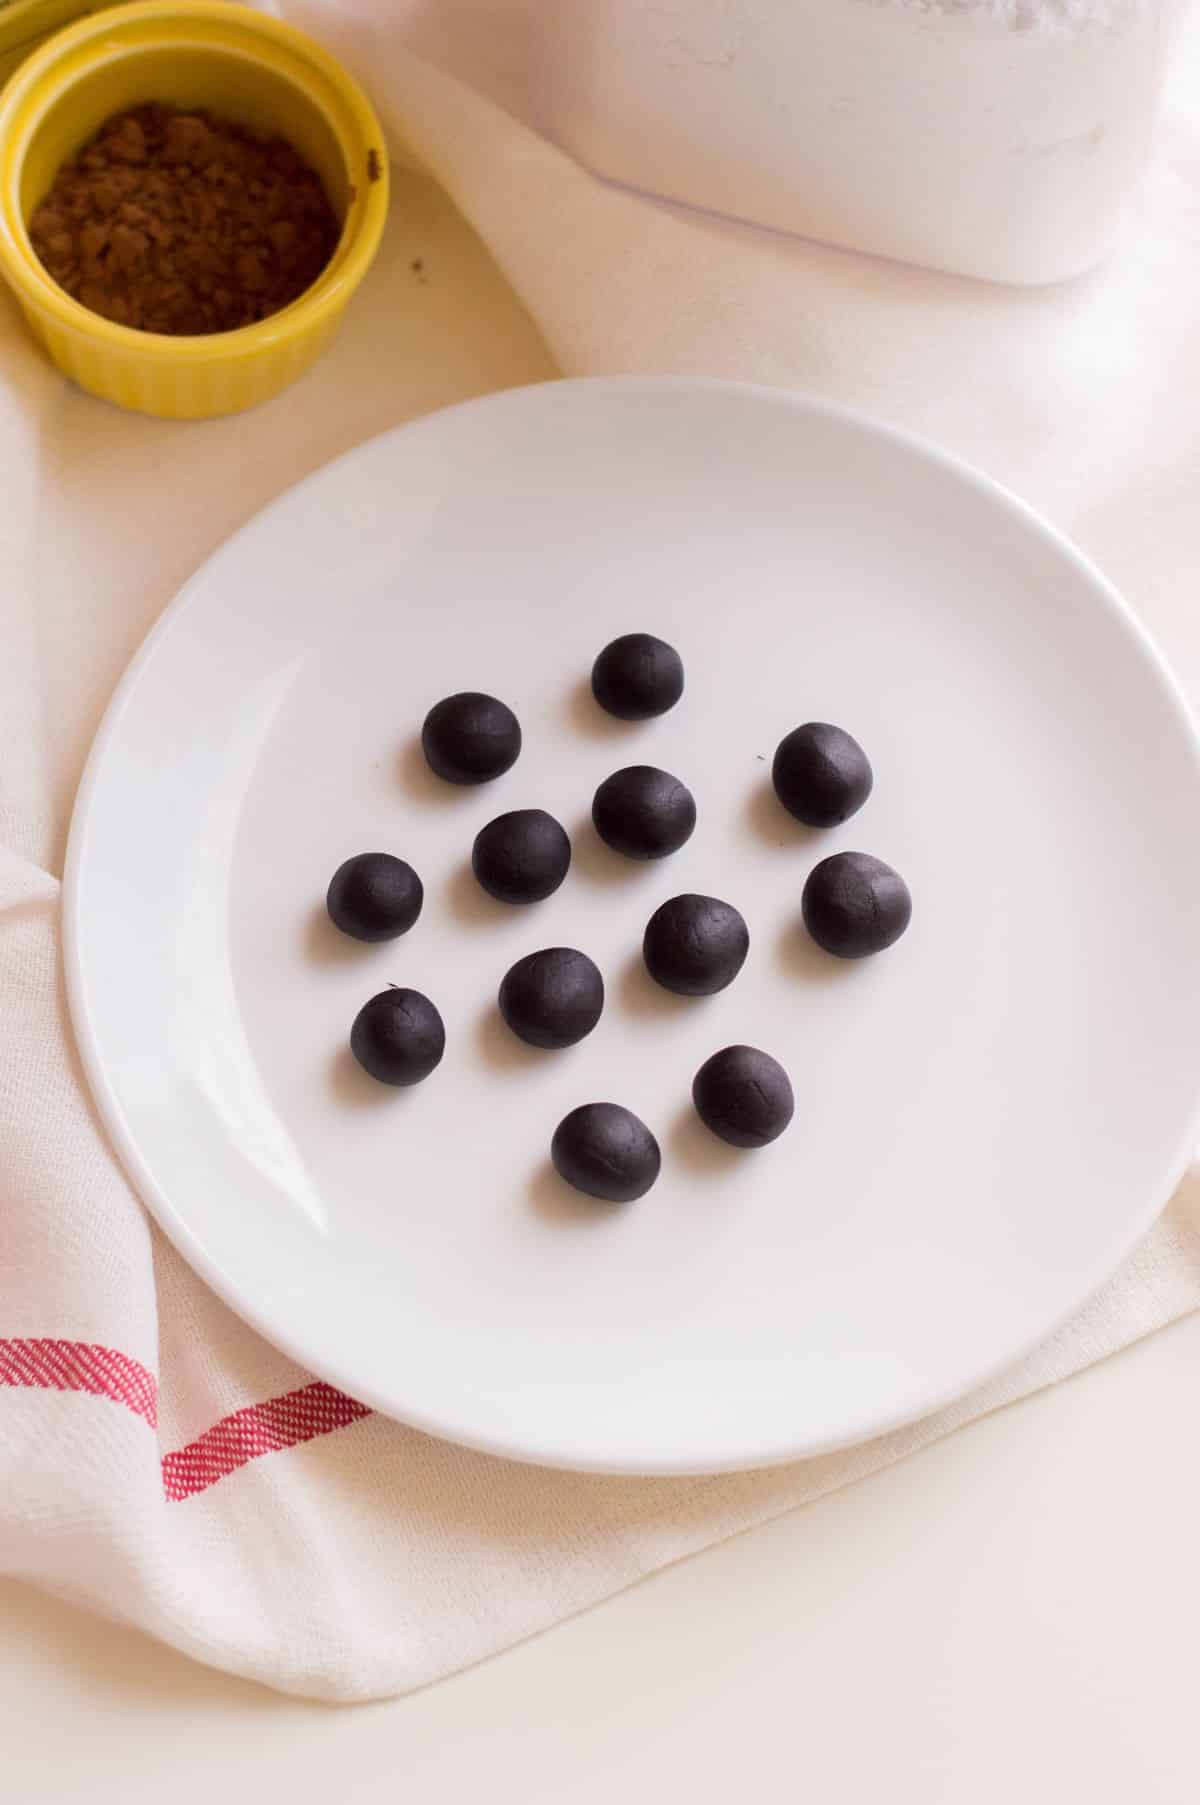 black fondant divided into ¾-inch spheres on a white plate